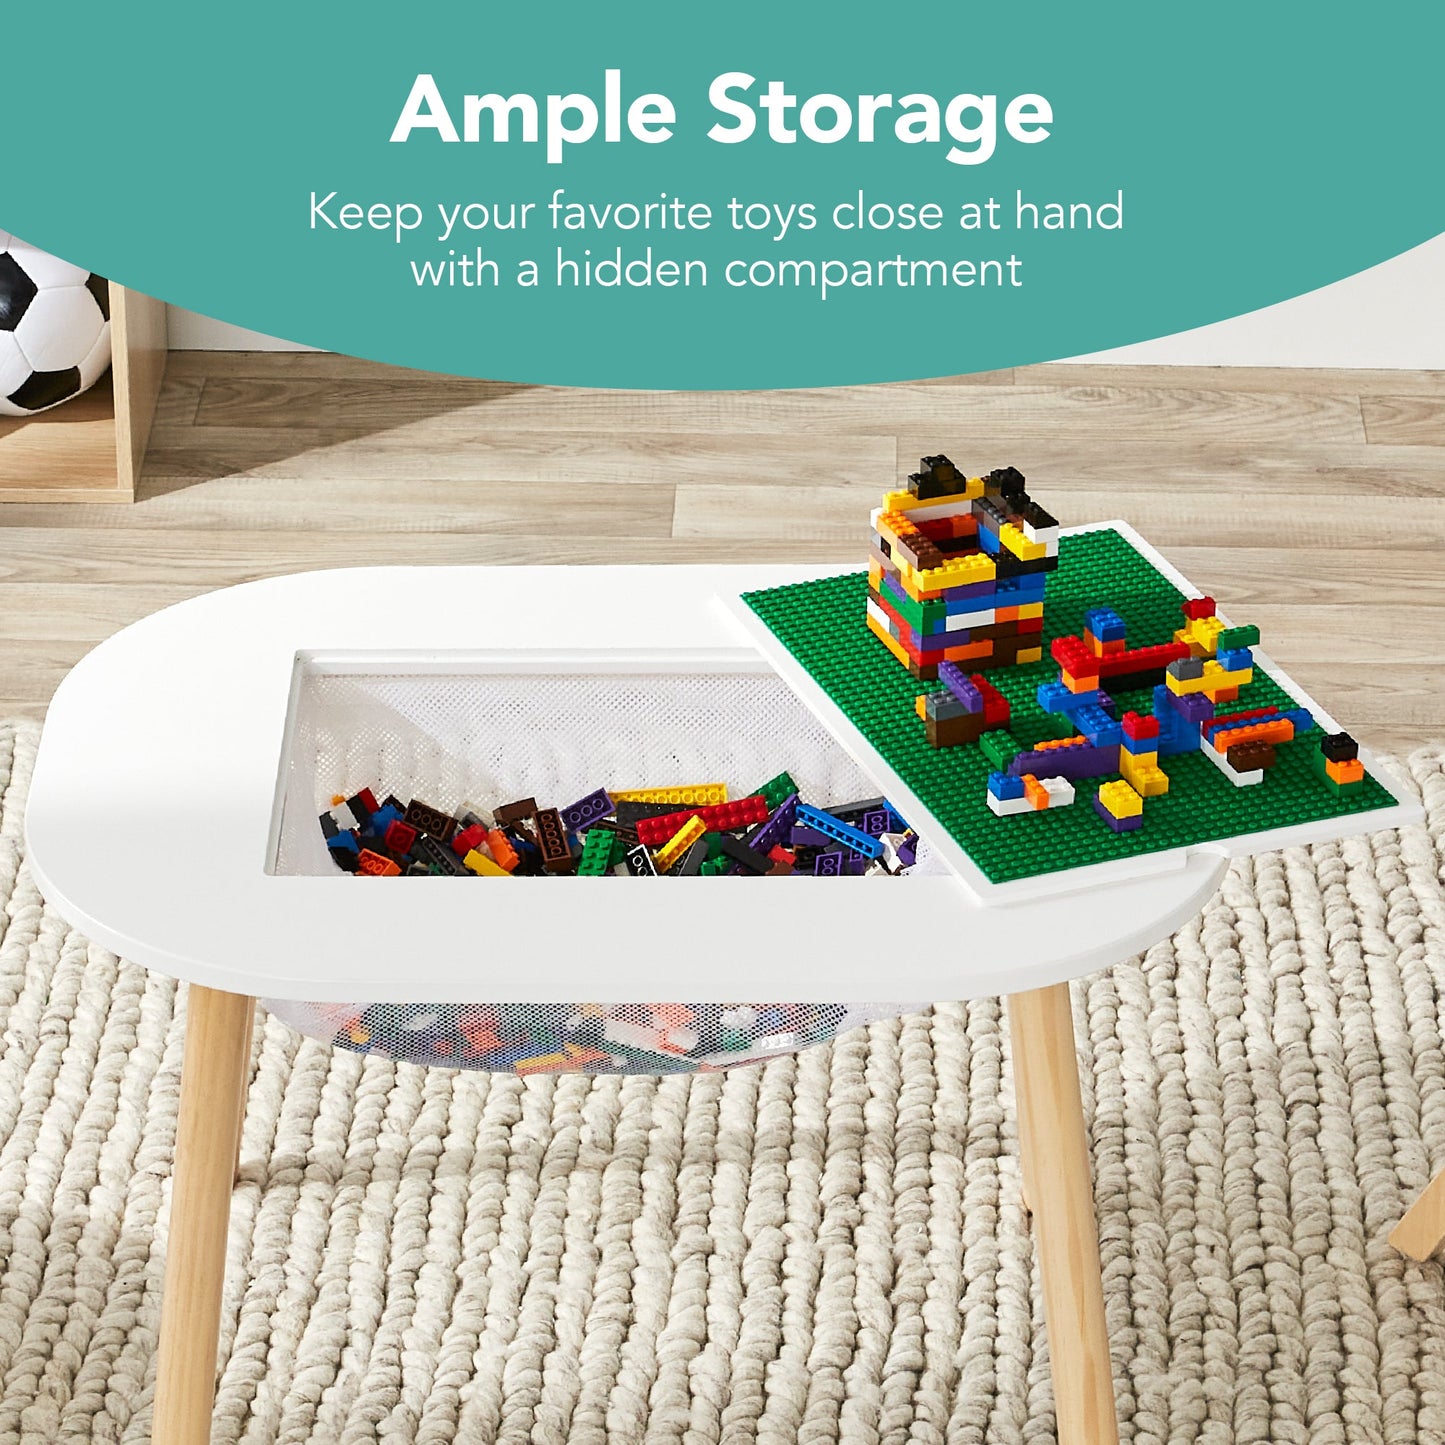 2-in-1 Kid's Building Block Table w/ 2 Stools, Storage Compartment